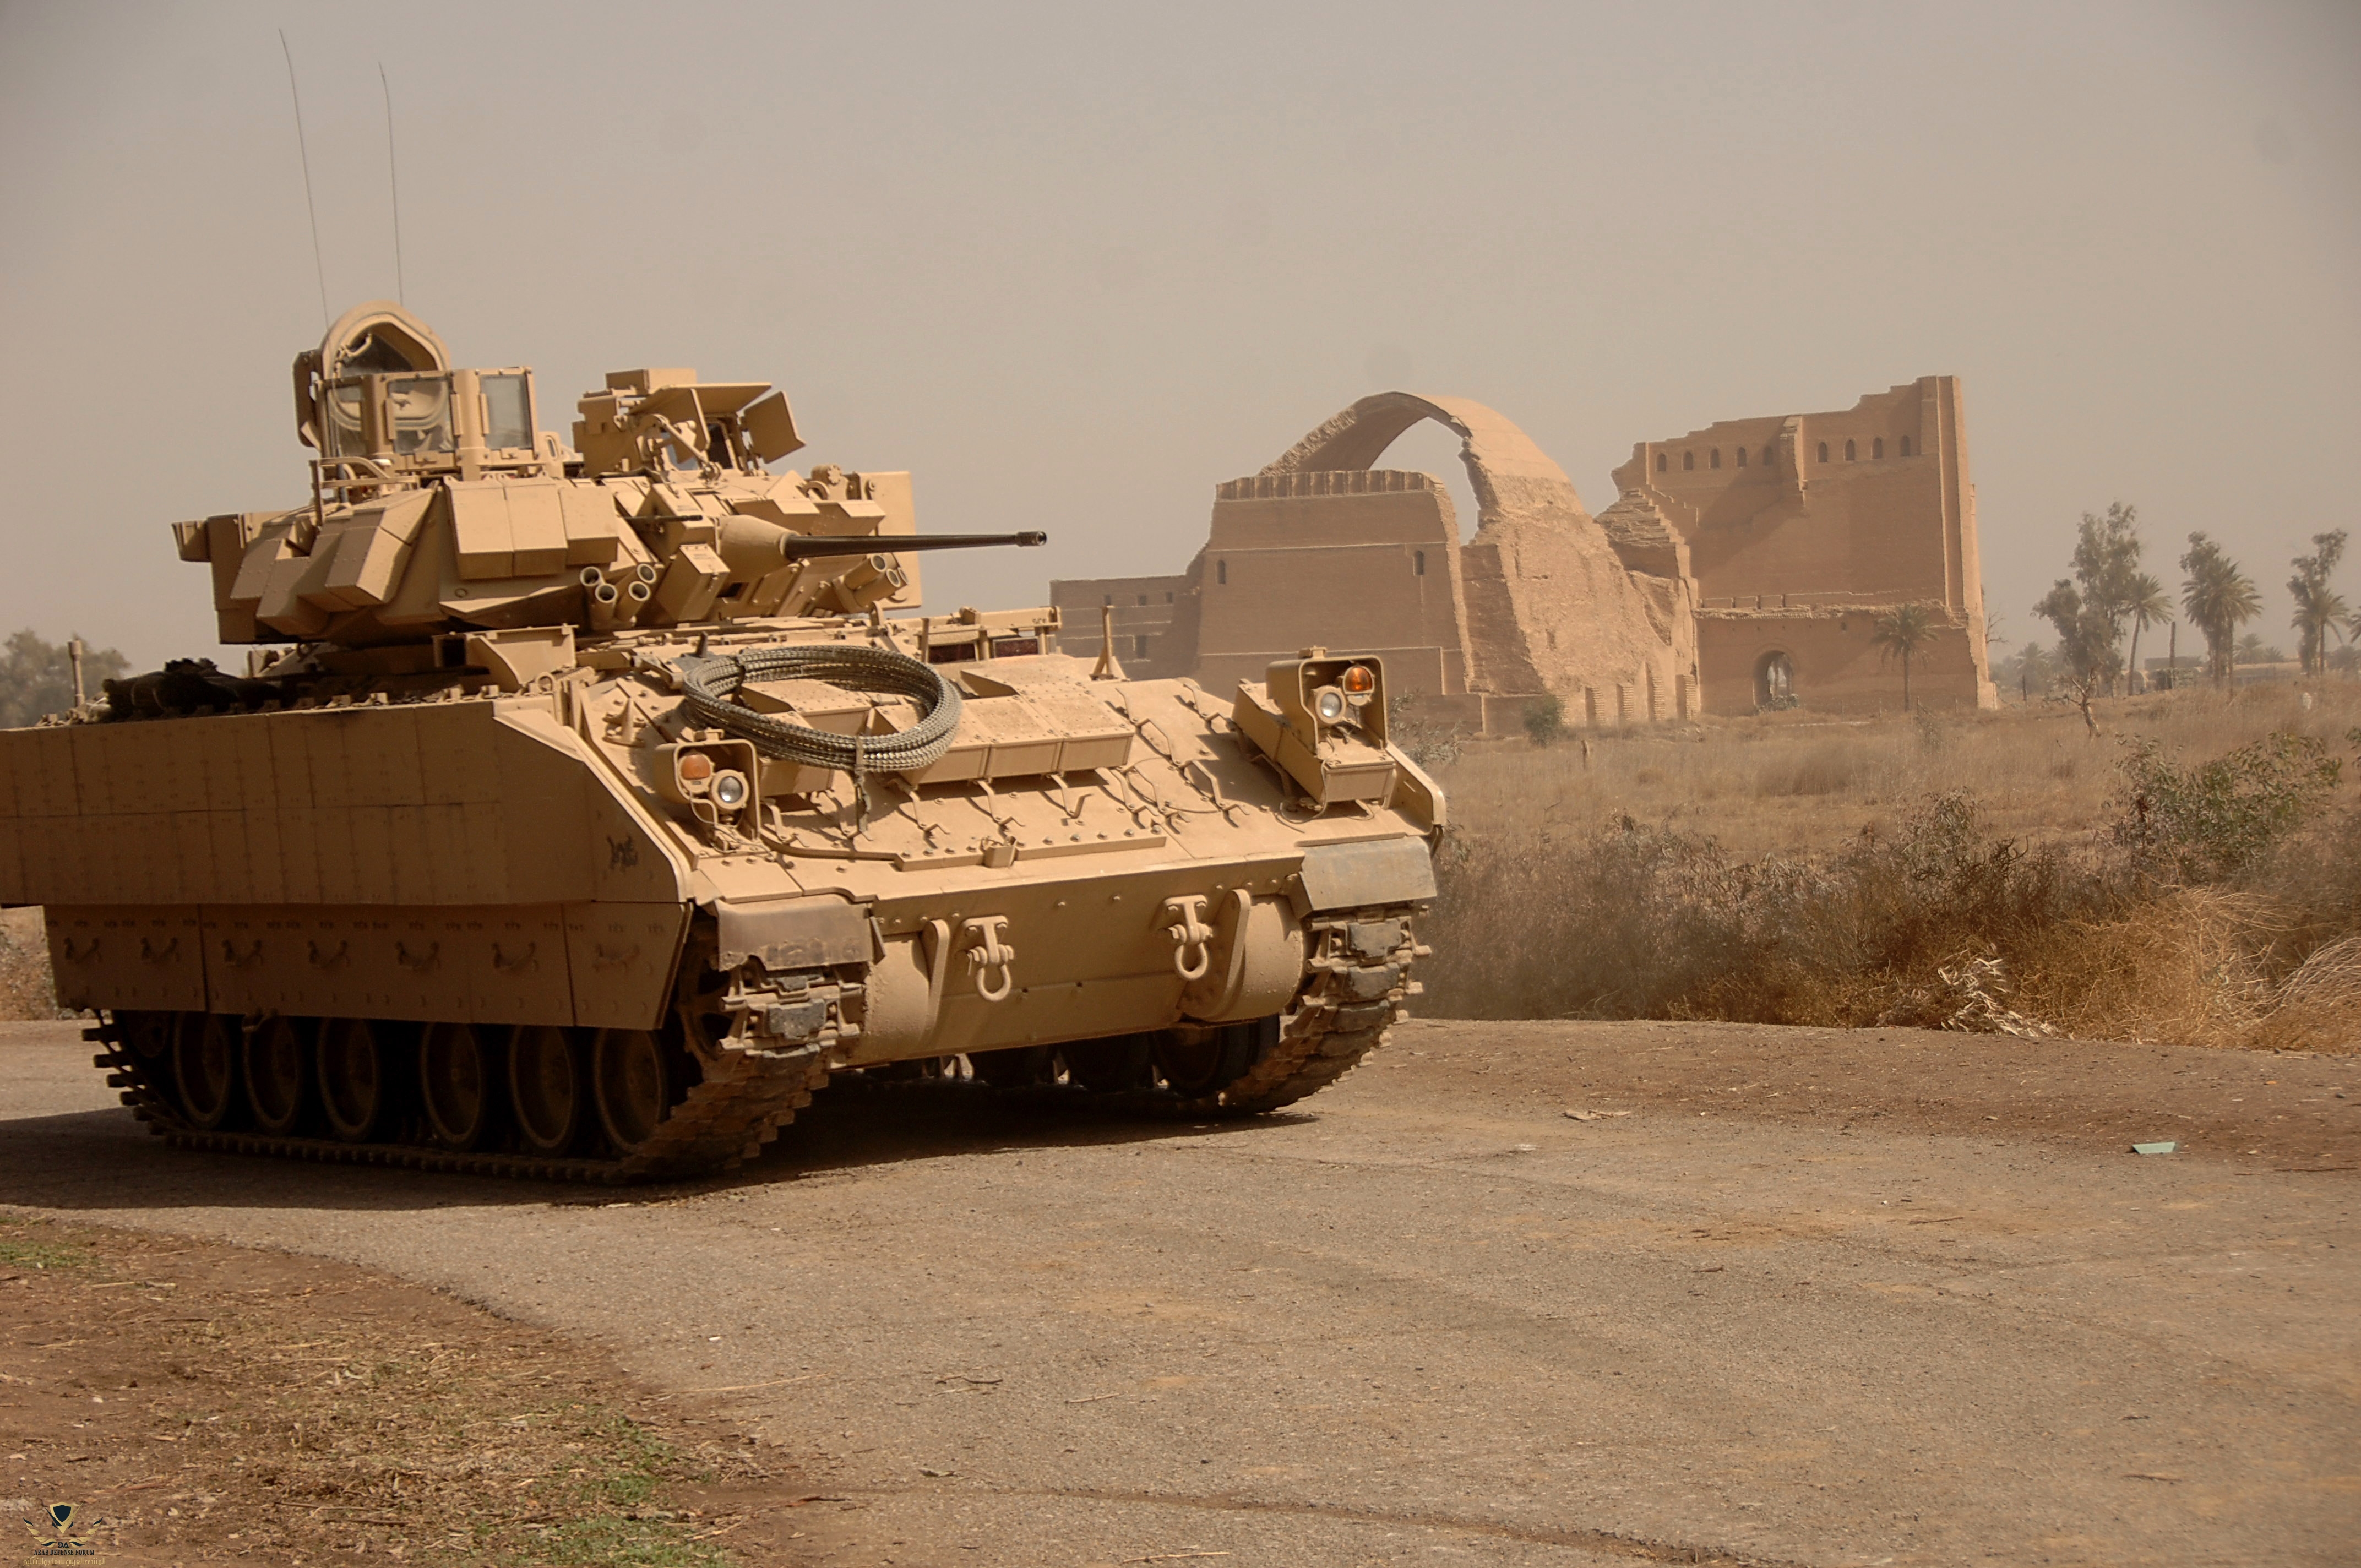 Bradley_Fighting_Vehicle_provides_security_for_clearing_operation_in_Iraq.jpg